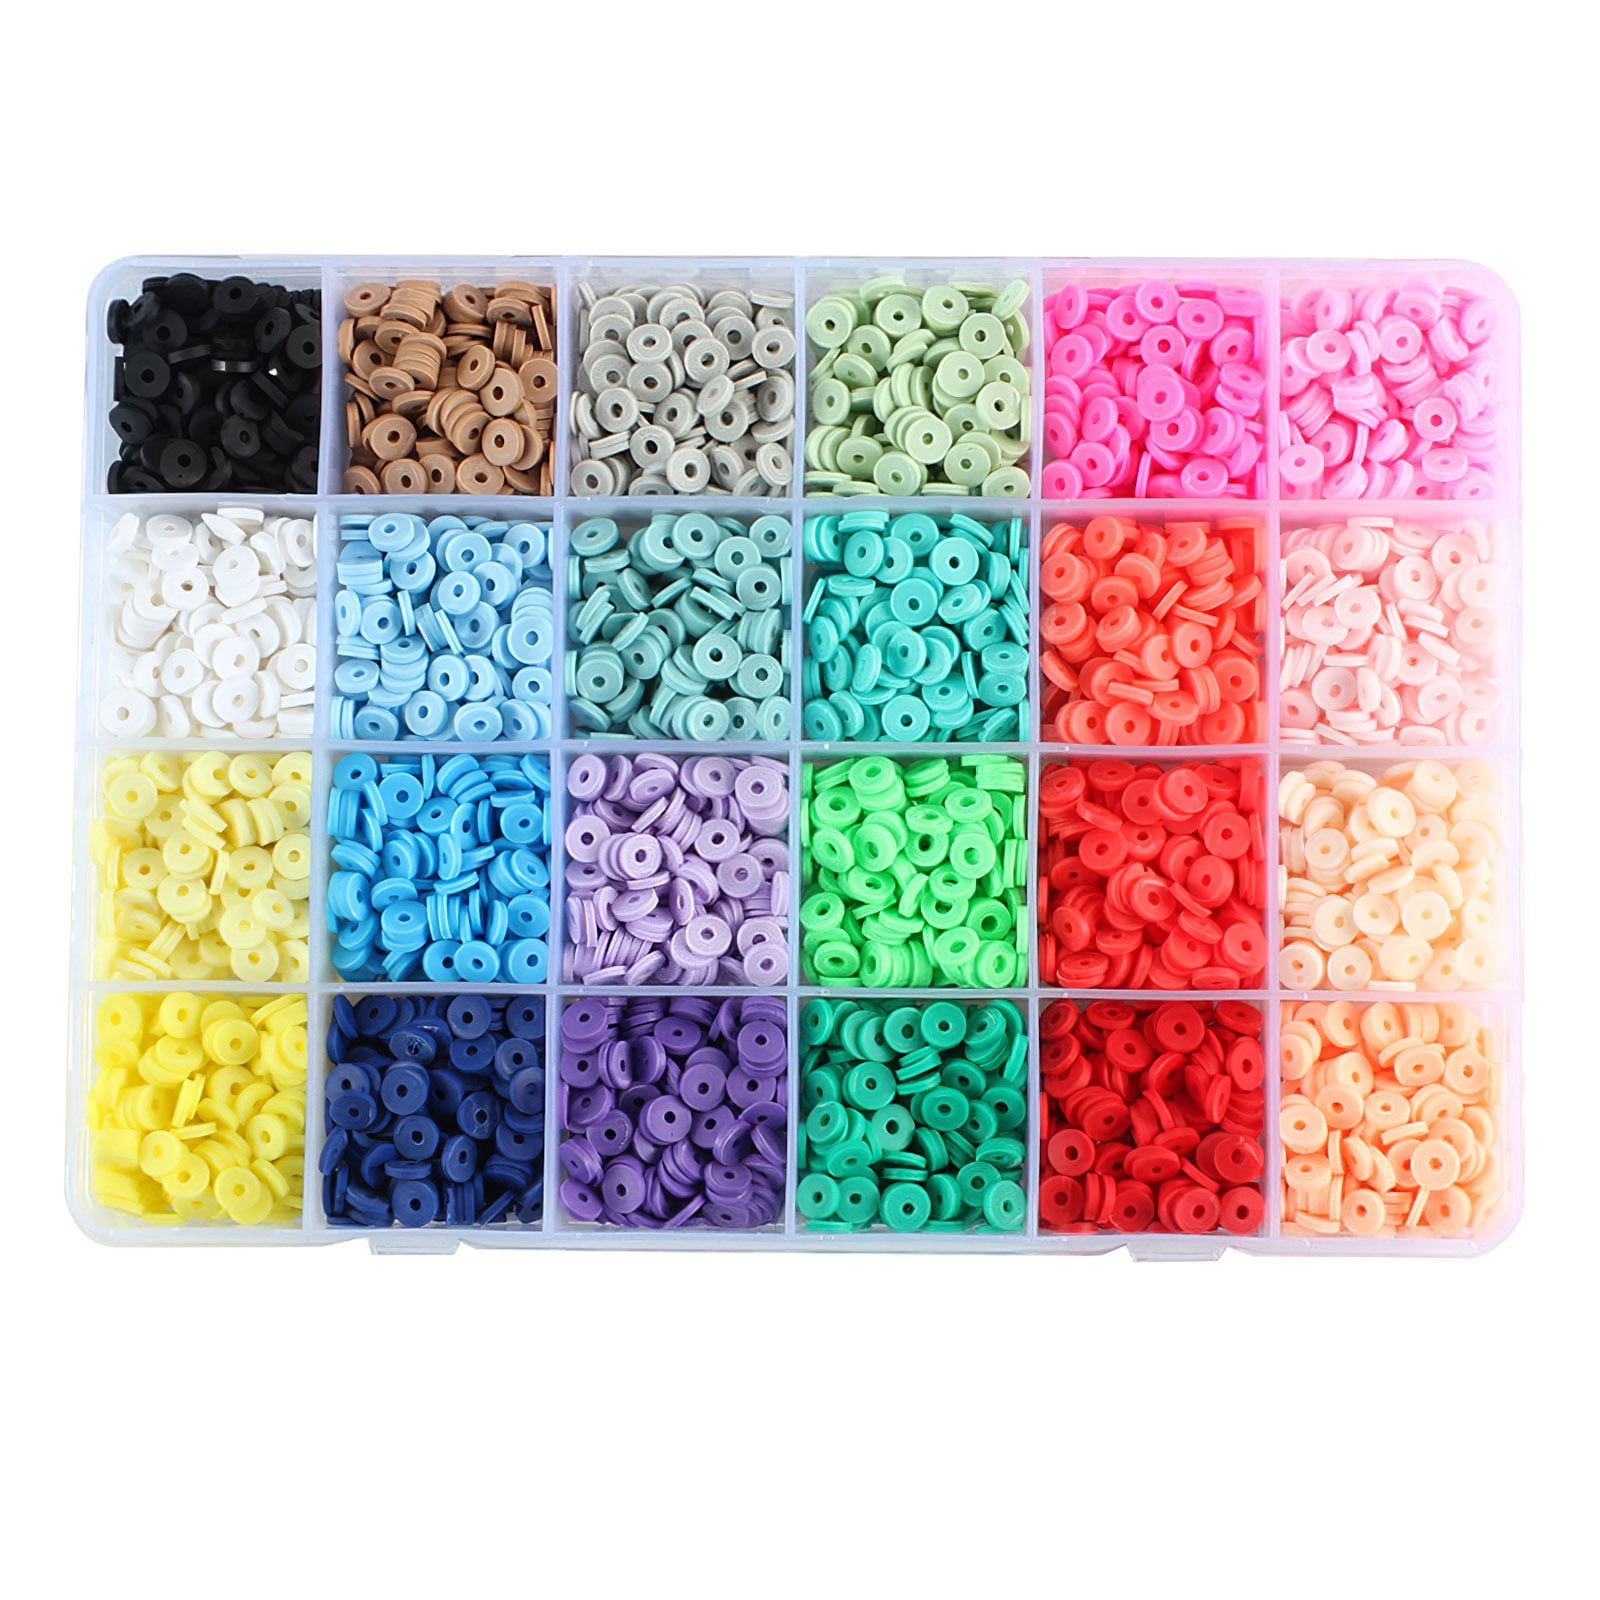 4600 PCS Flat Bead Kit Clay Flat Beads 24 Colors Flat Round Polymer Clay  with Letter Beads Pendant Charms and Elastic Strings Spacer Clay Beads Kit  - China Clay Bead Kit and